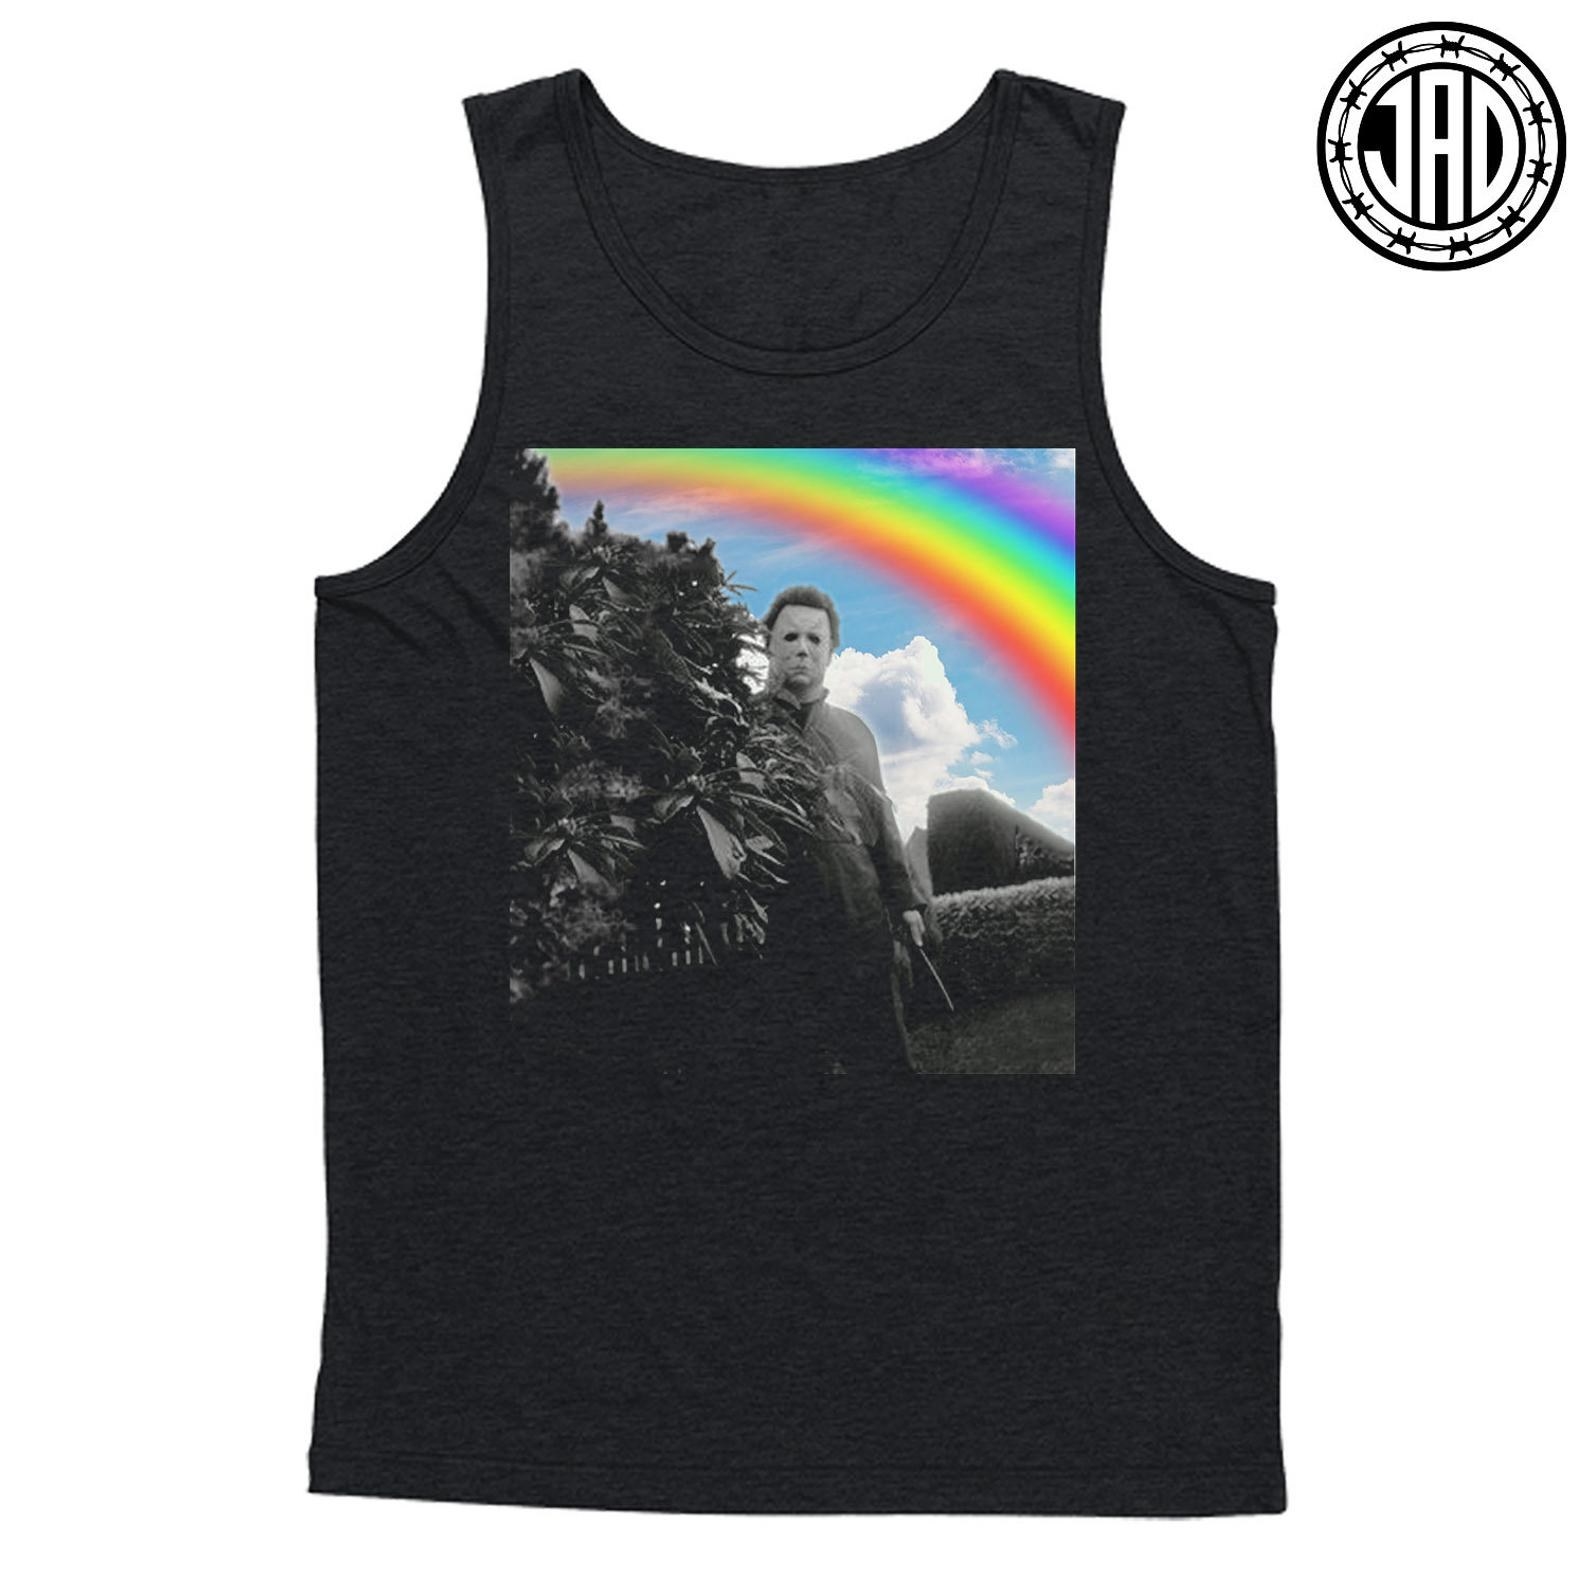 black tank top with Michael Myers from the Halloween movie hiding behind a bush with a rainbow in the background